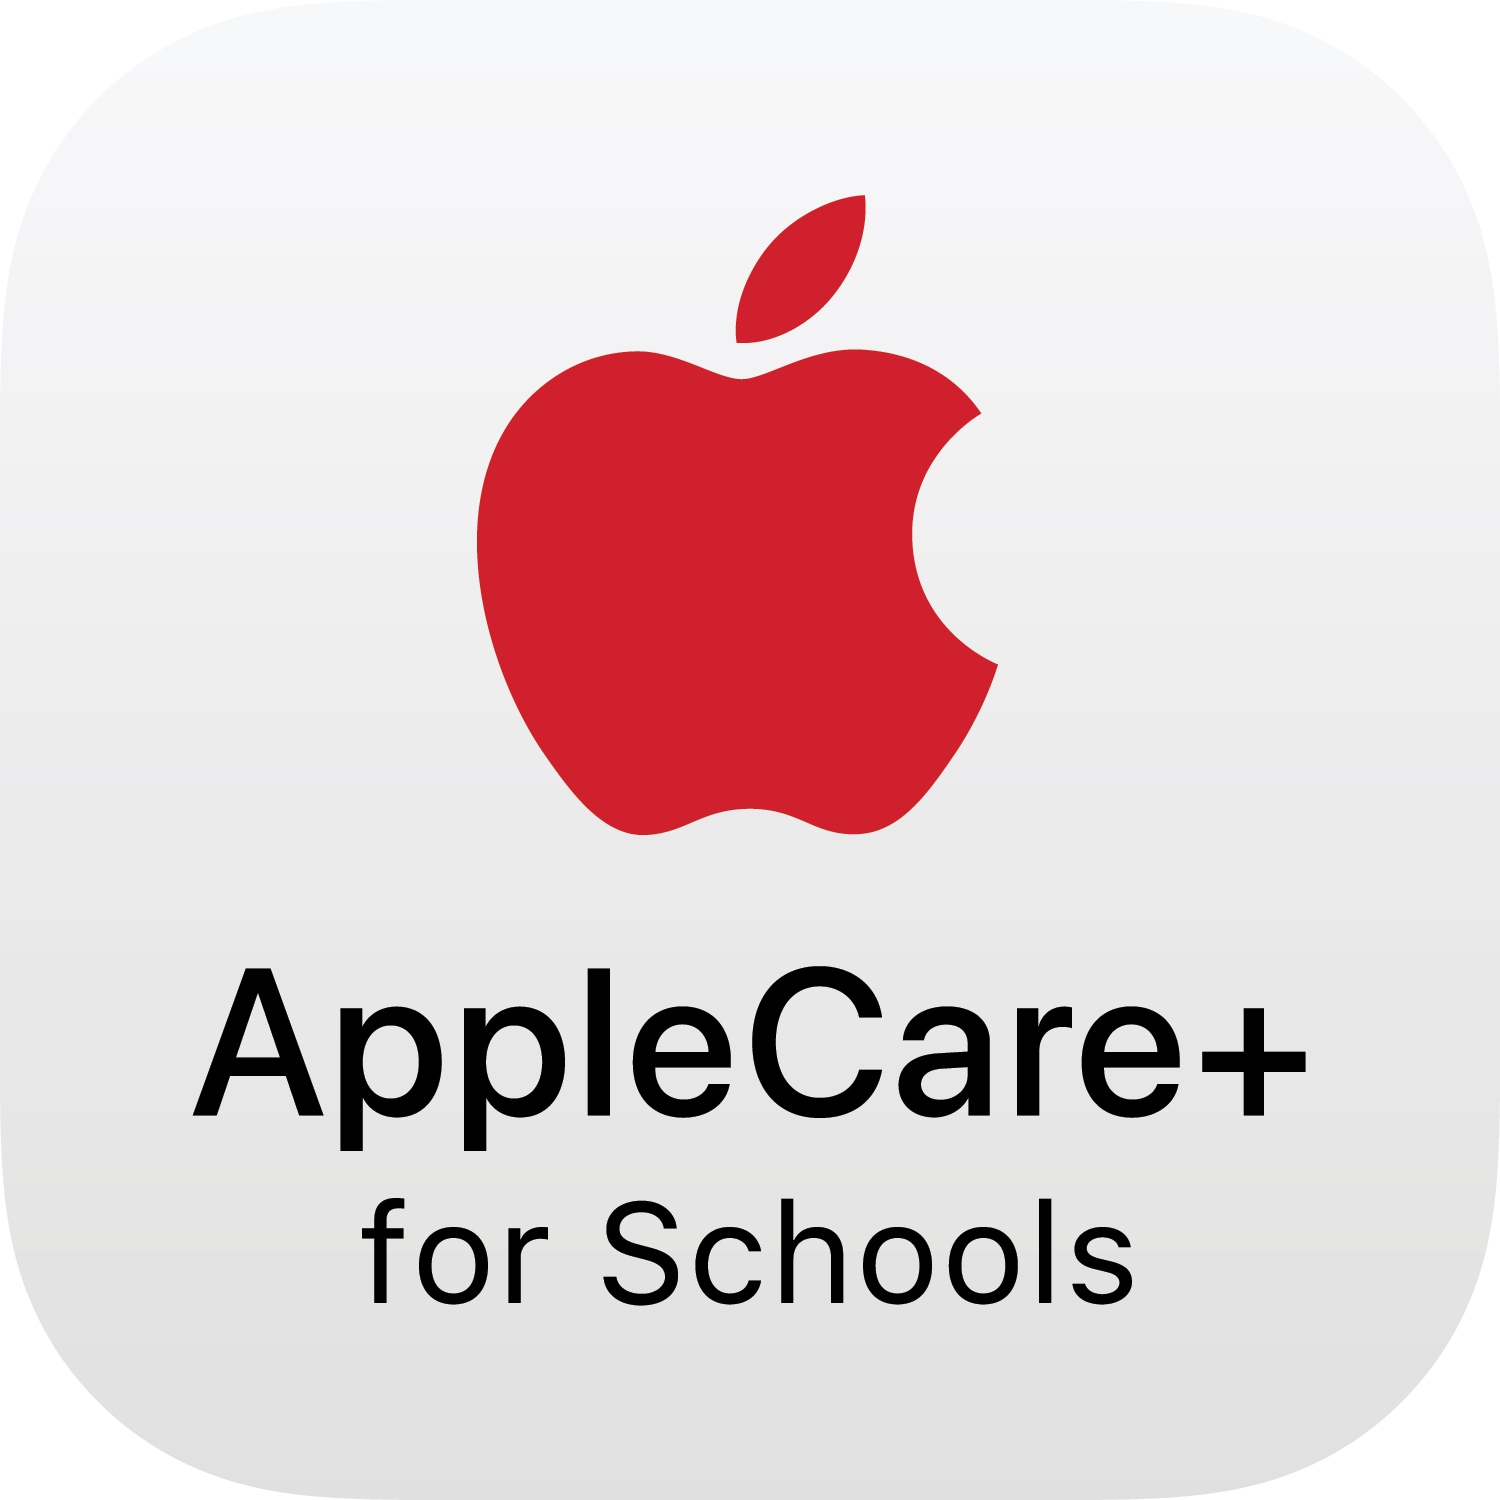 AppleCare+ for Schools - 4 Year - Extended Service Agreement - for Mac Pro